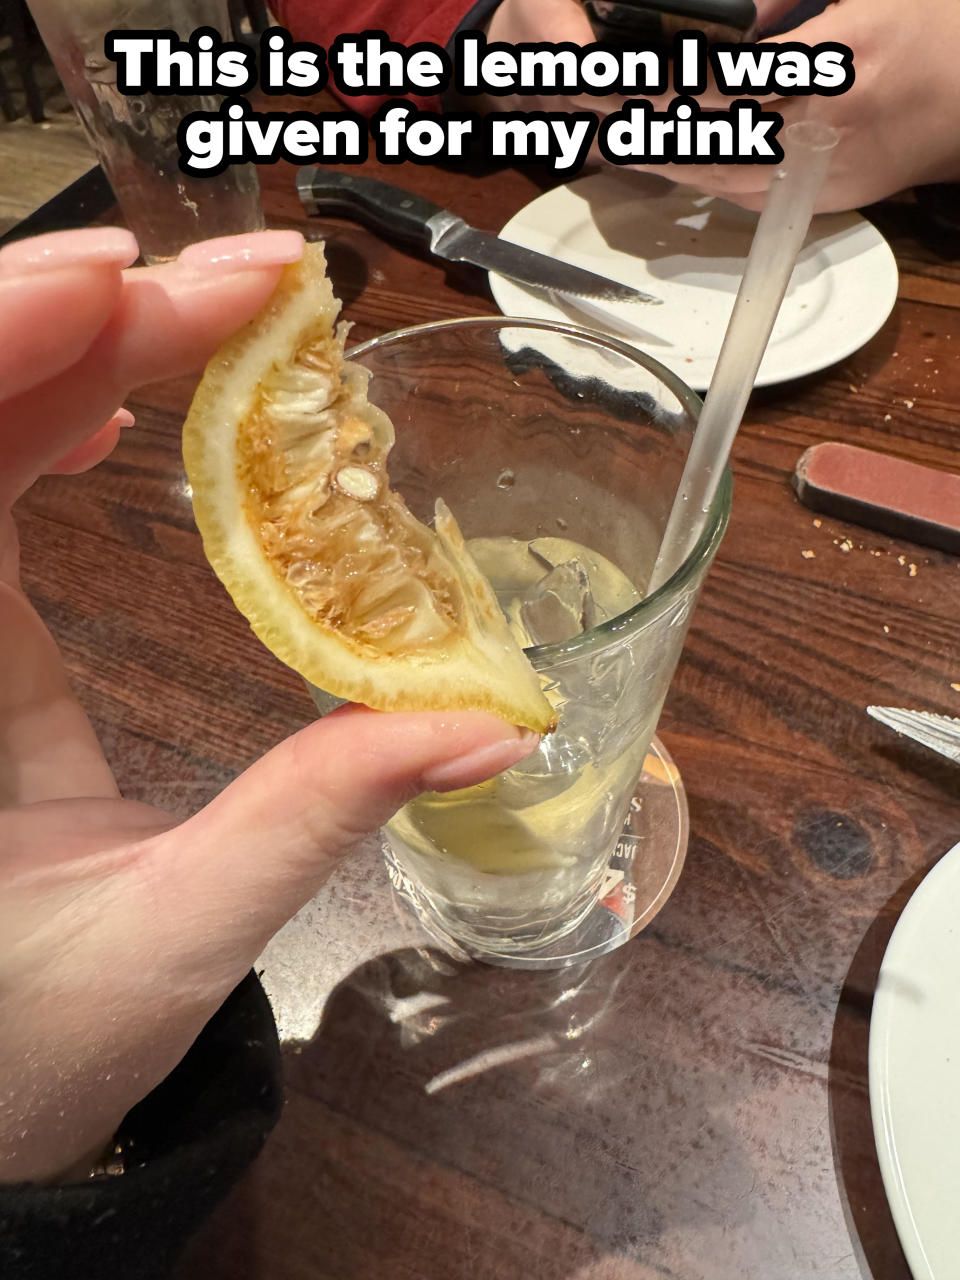 A person holds a desiccated, old lemon slice with caption "This is the lemon I was given for my drink"